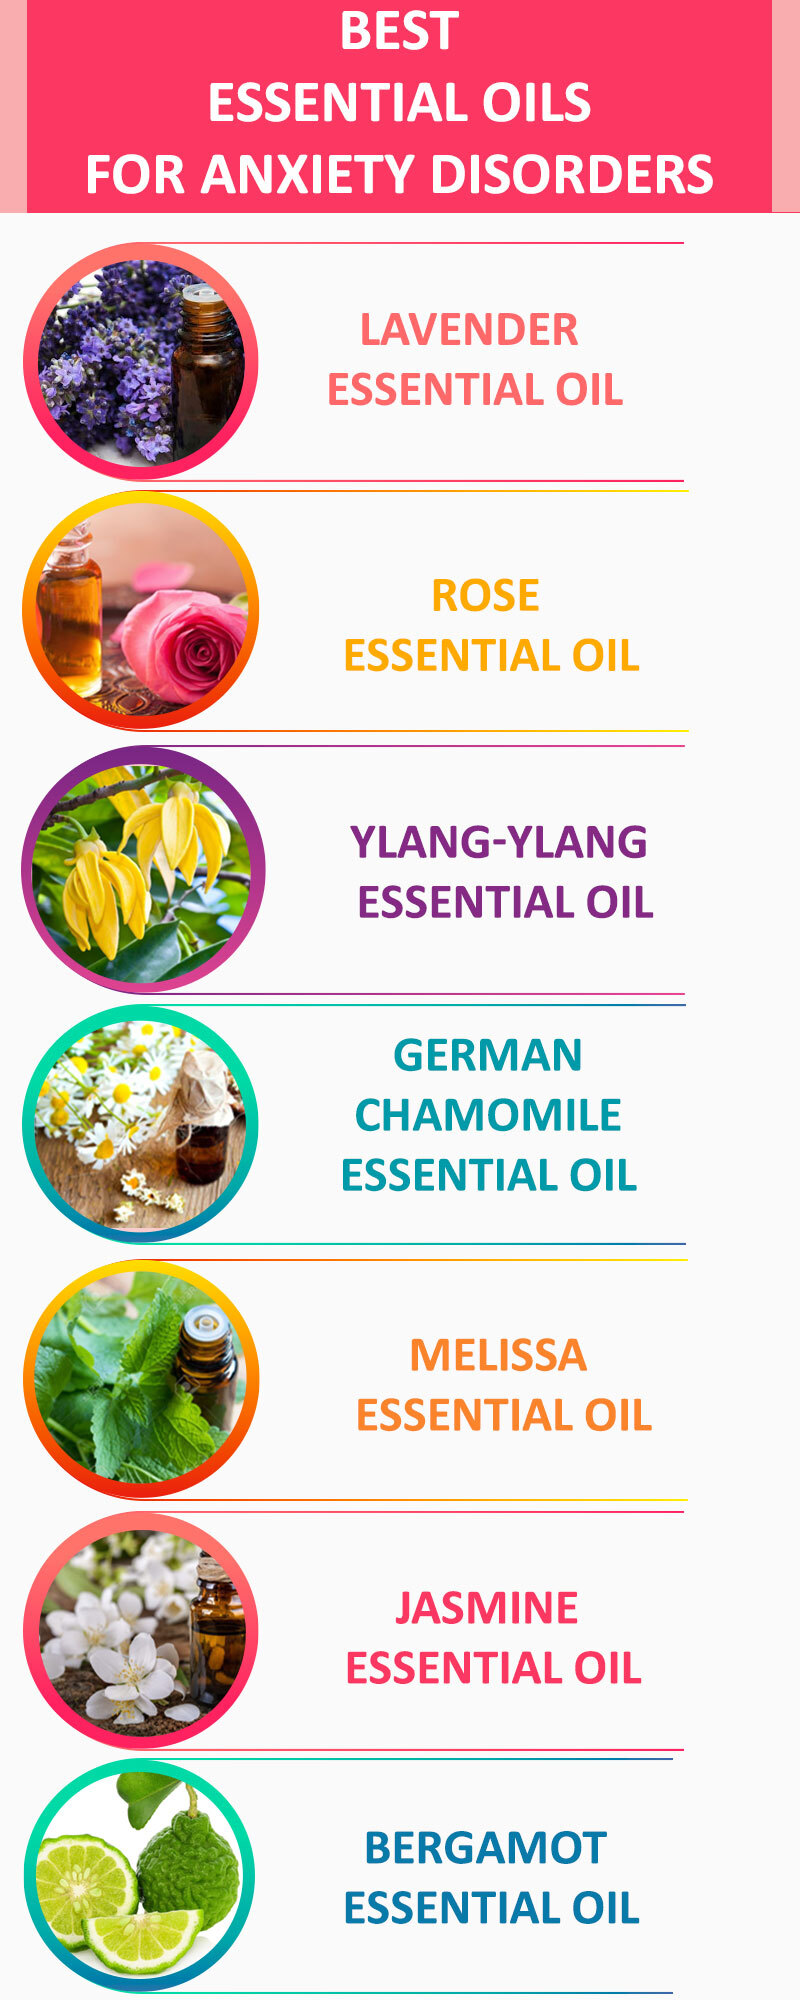 QuintEssential Oils - Essential oils are a great natural way to